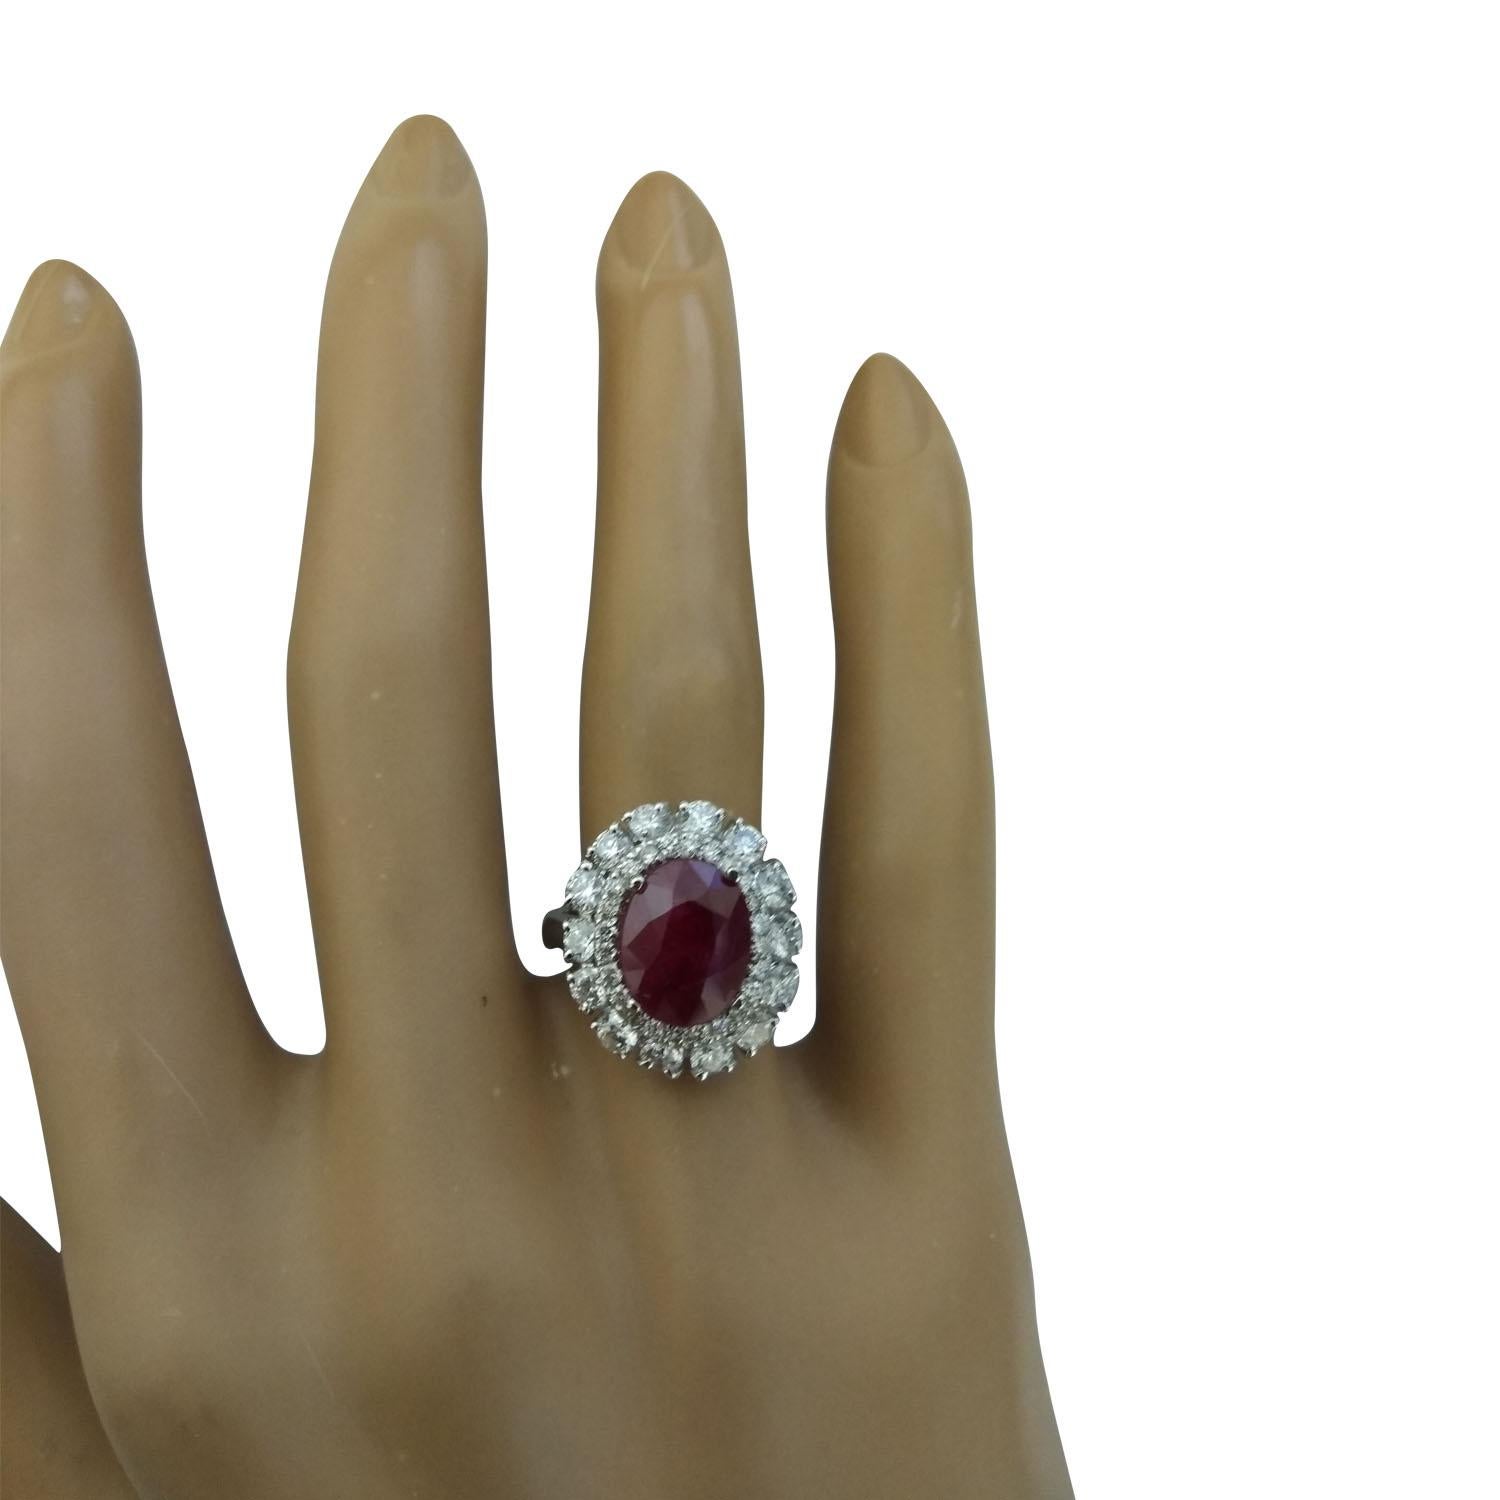 4.10 Carat Natural Ruby 14 Karat Solid White Gold Diamond Ring
Stamped: 14K 
Total Ring Weight: 5 Grams 
Ruby Weight 2.50 Carat (10.00x8.00 Millimeters)
Diamond Weight: 1.60 carat (F-G Color, VS2-SI1 Clarity 
Quantity: 38
Face Measures: 17.55x15.15